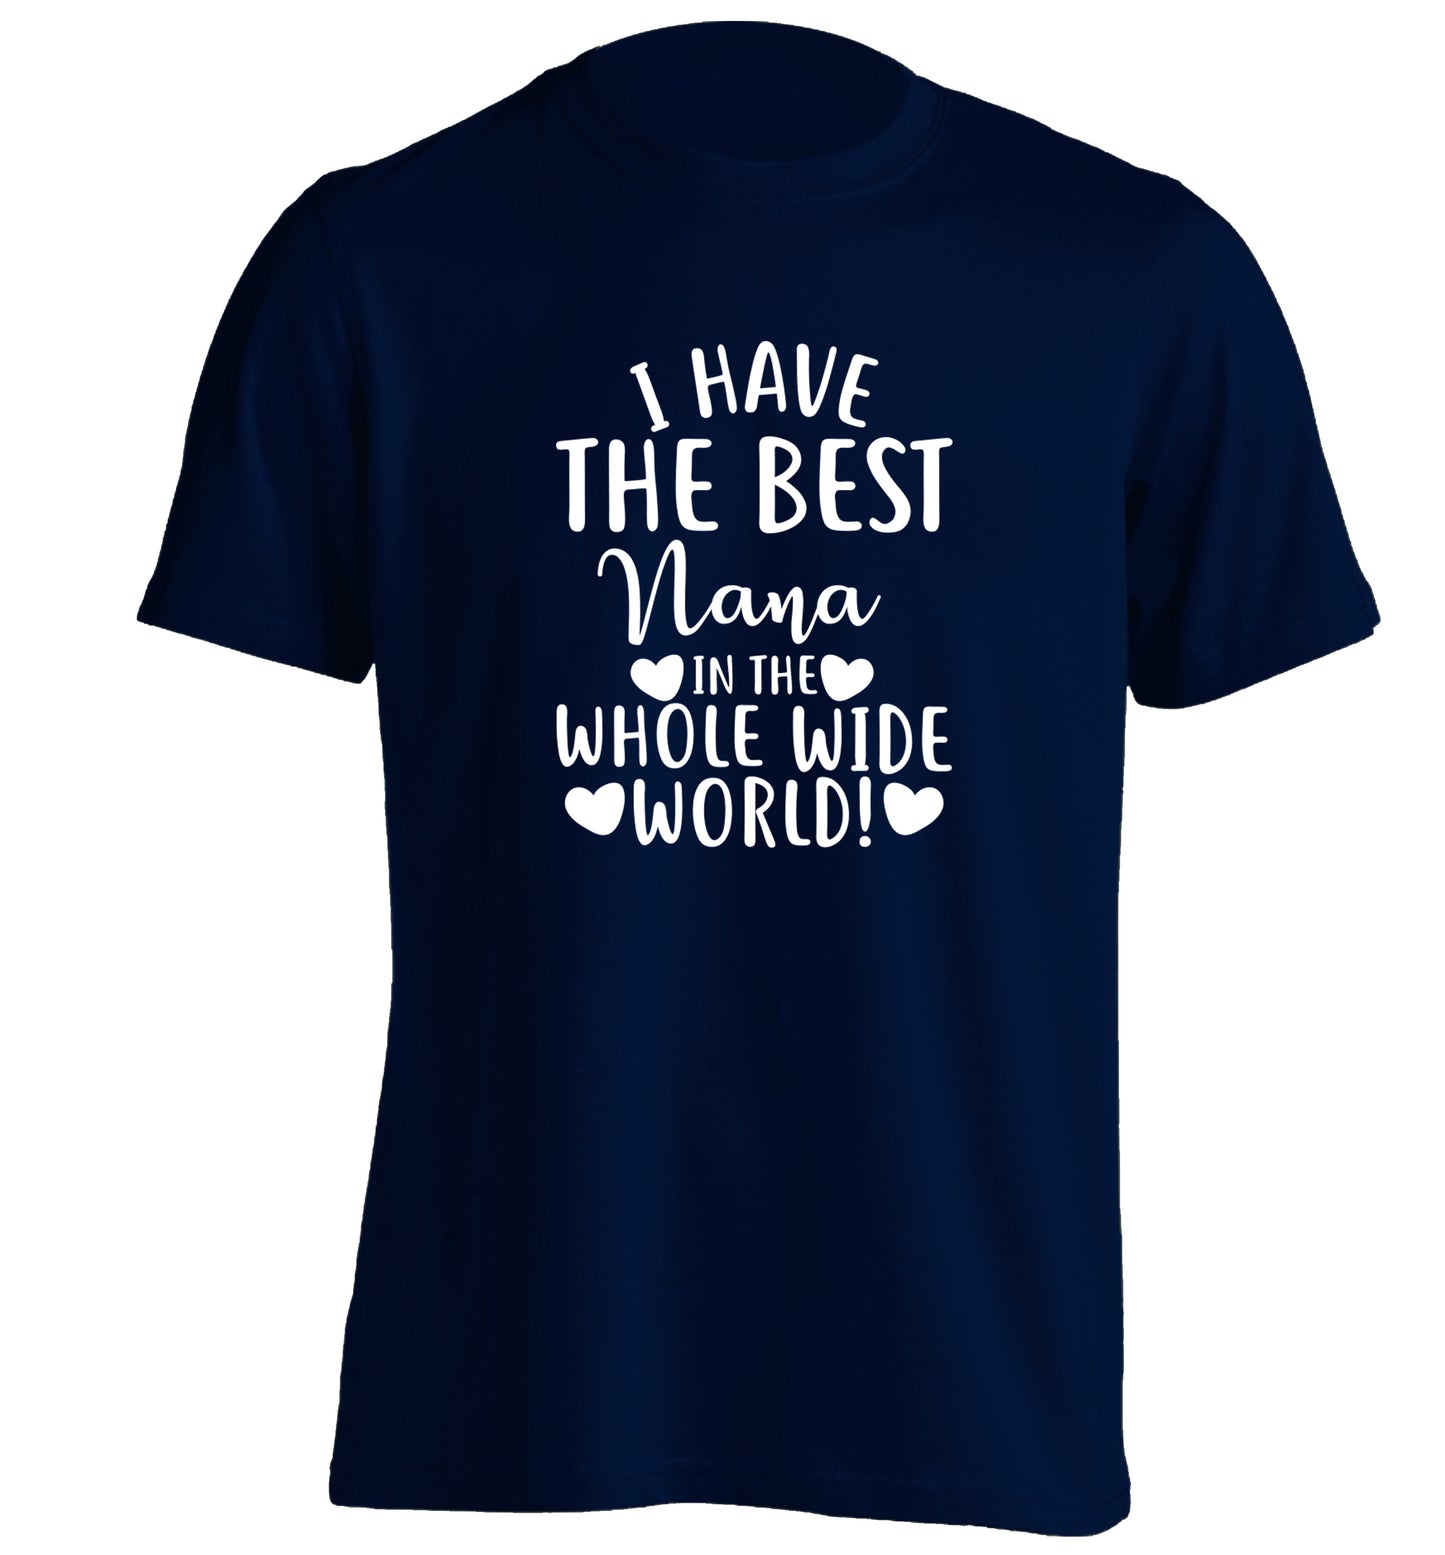 I have the best nana in the whole wide world! adults unisex navy Tshirt 2XL